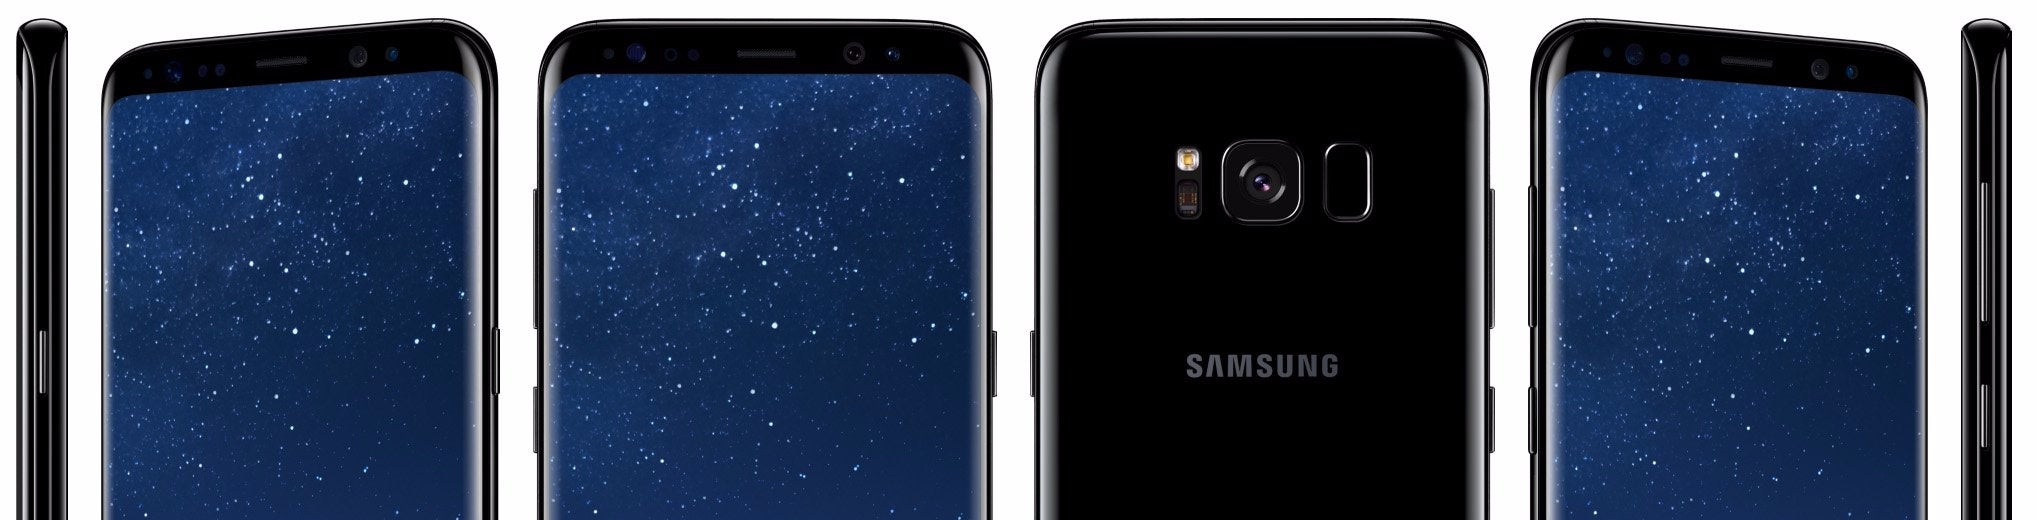 Image for Samsung Galaxy S8 review